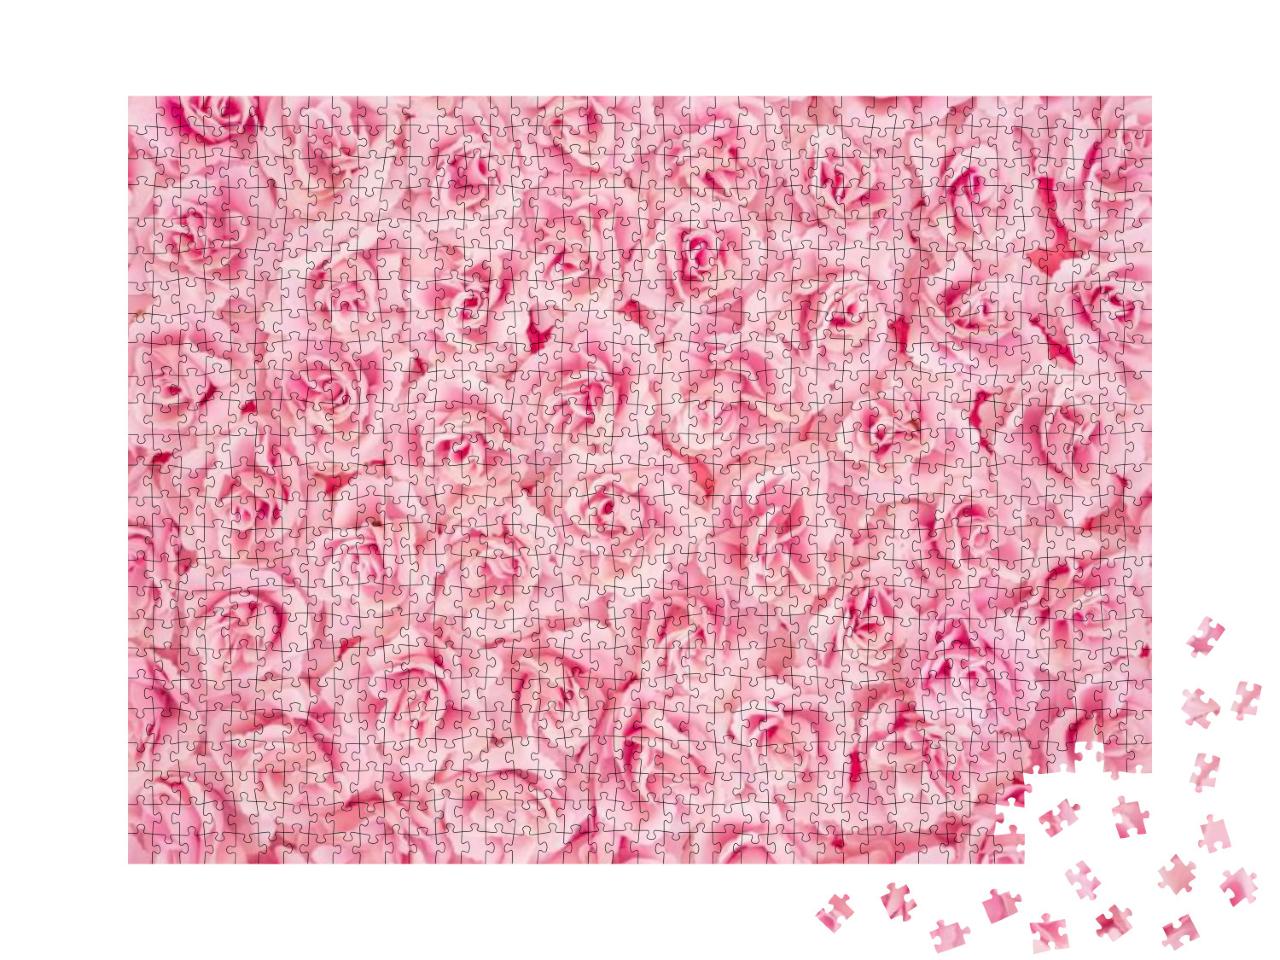 Background Image of Pink Roses... Jigsaw Puzzle with 1000 pieces